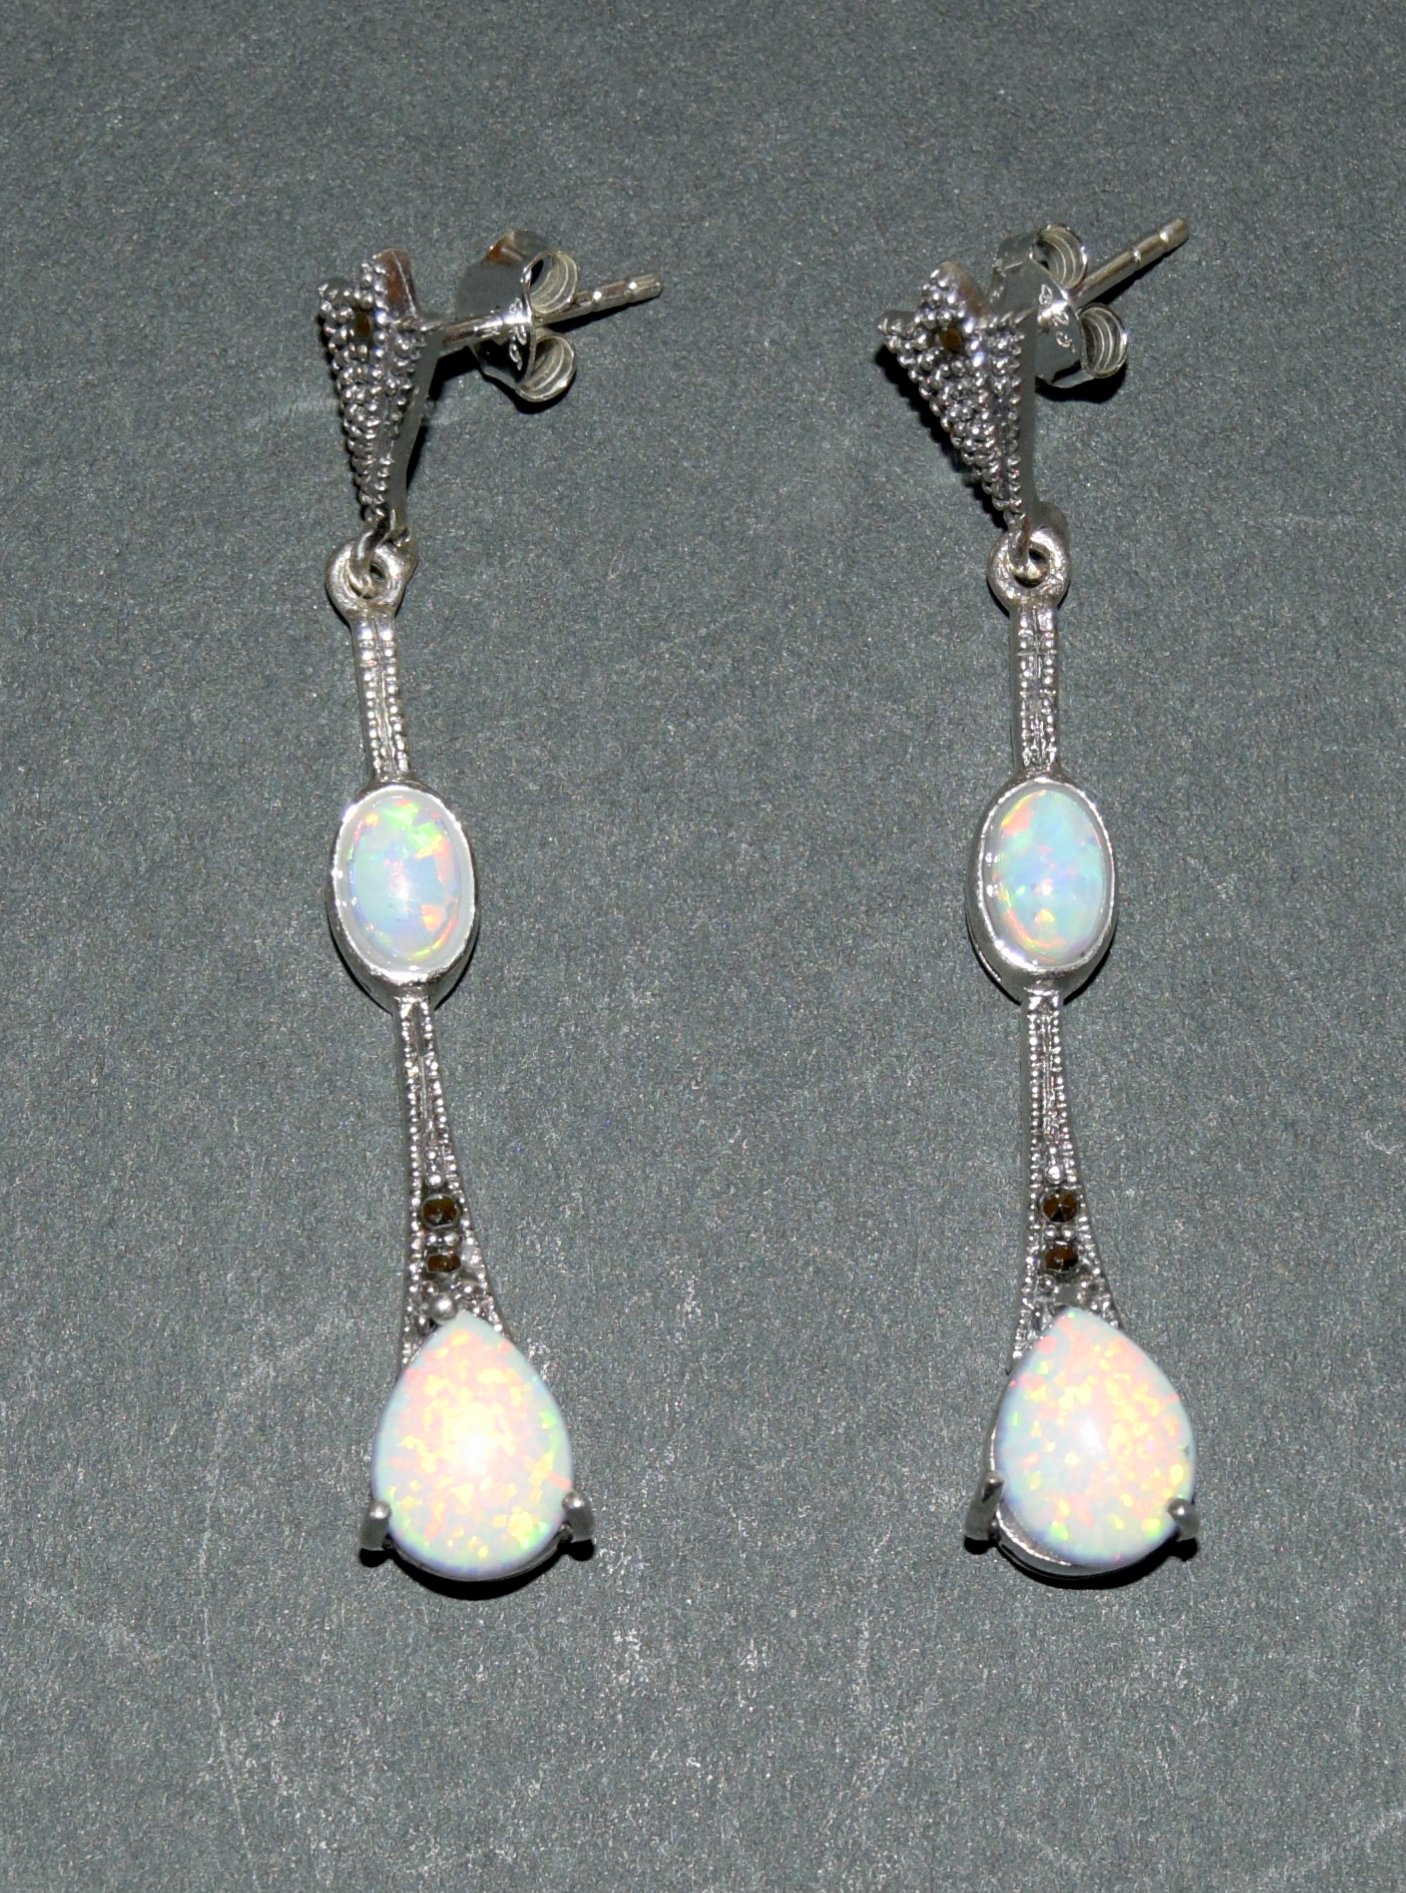 Pair of silver and opal drop earrings in the art deco style